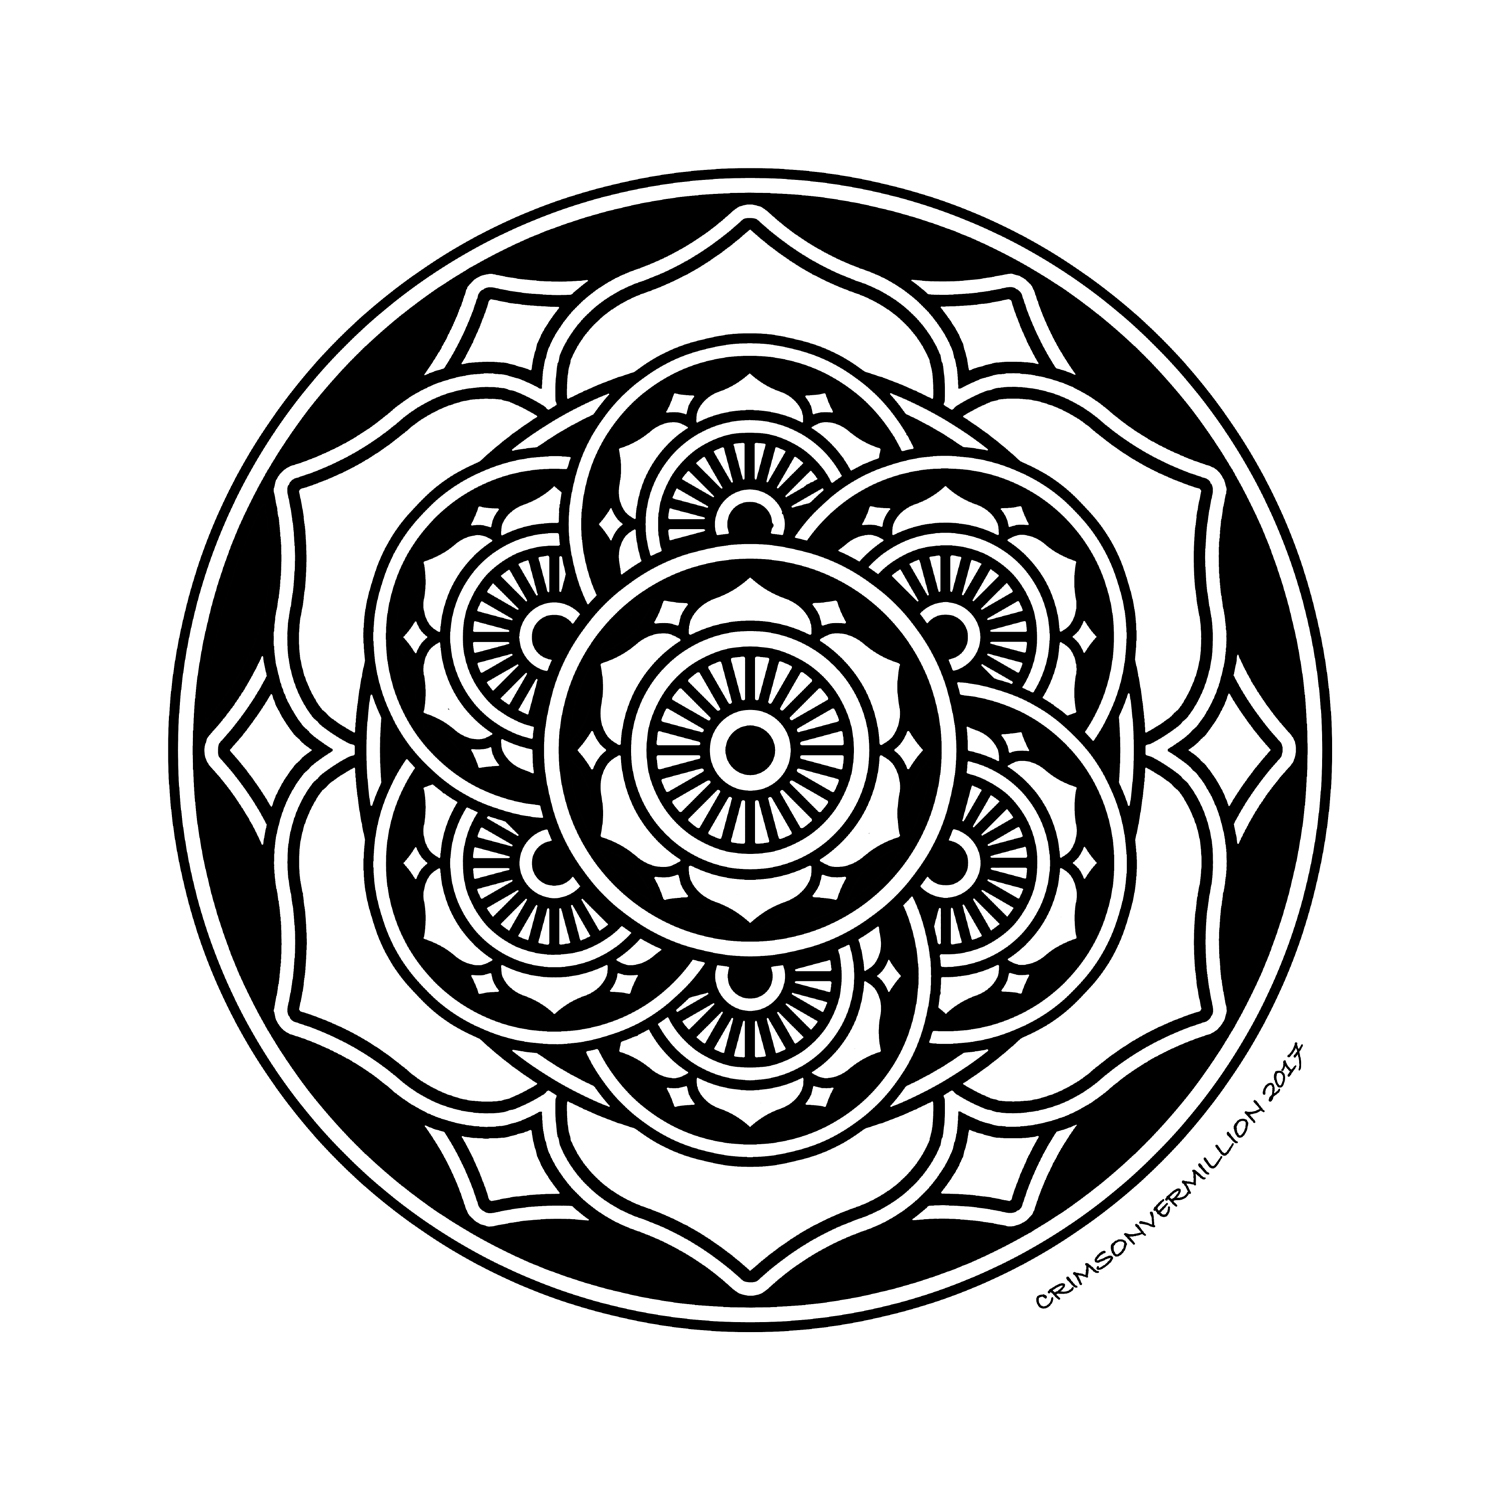 Thanks to an amazing organisation, everything fits together in this mandala!, Artist : Crimson Vermillion